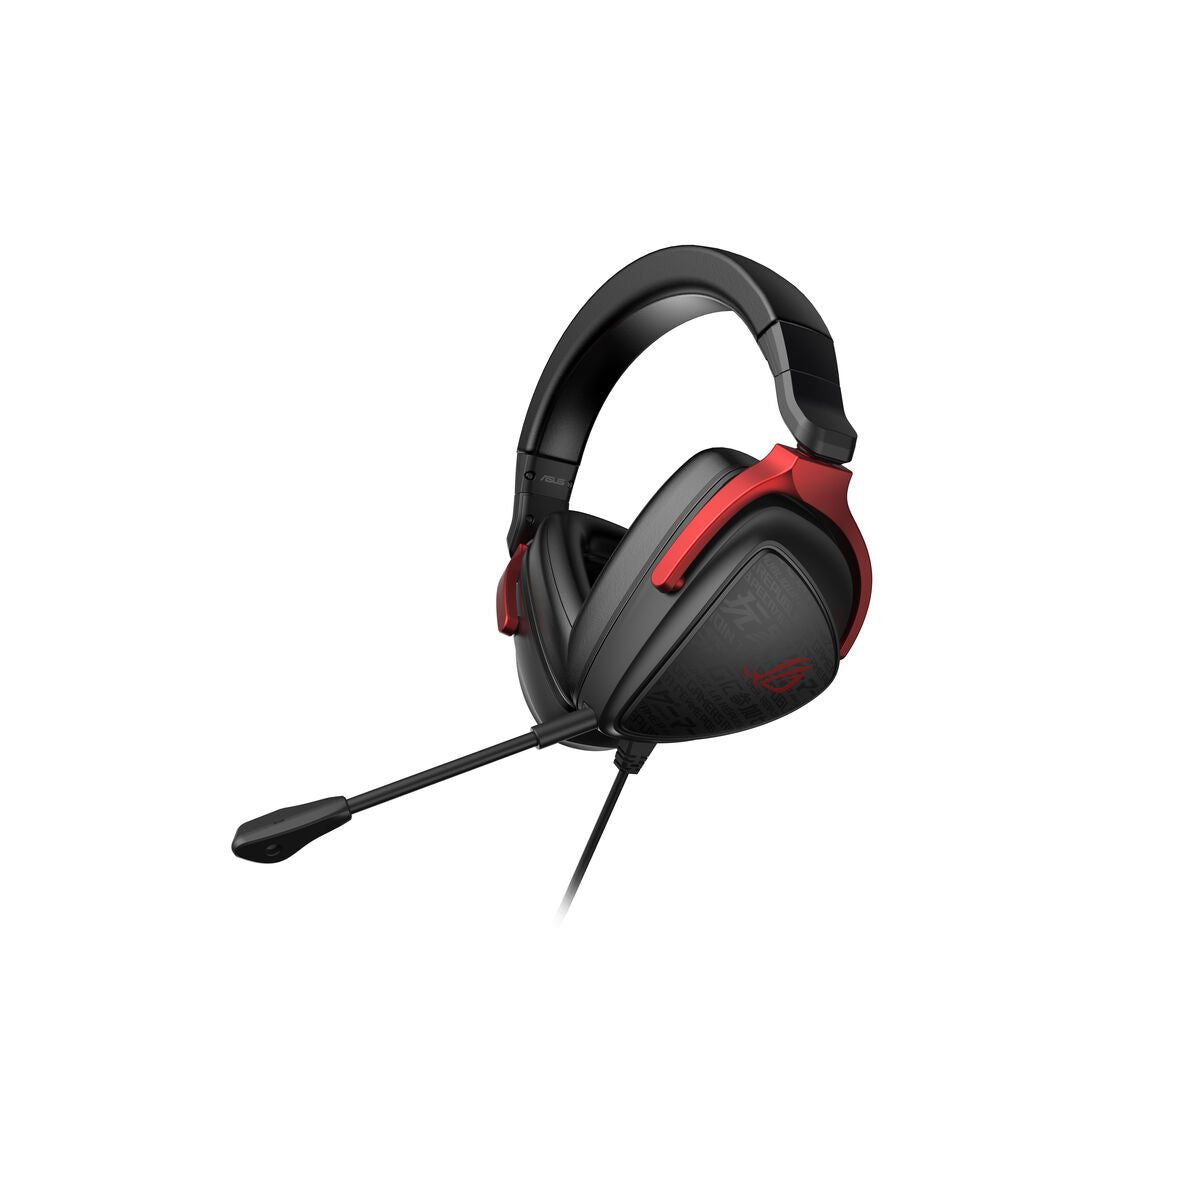 Asus Delta S Core Gaming-Headsets mit Mikrofon